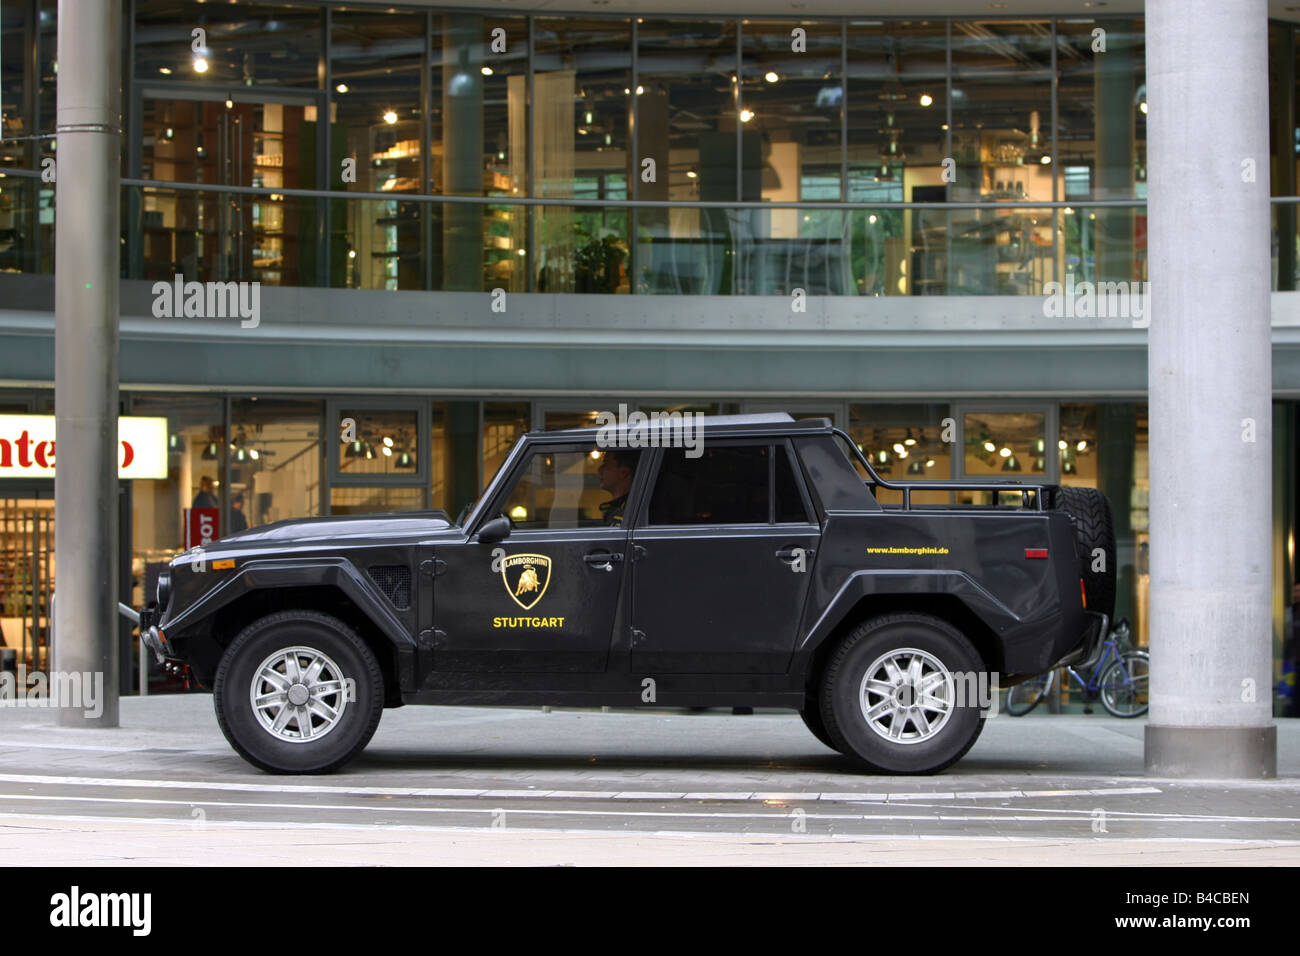 Car, Lamborghini LM 002, model year 1982-1992, black, cross country vehicle, standing, upholding, side view, City, photographer: Stock Photo